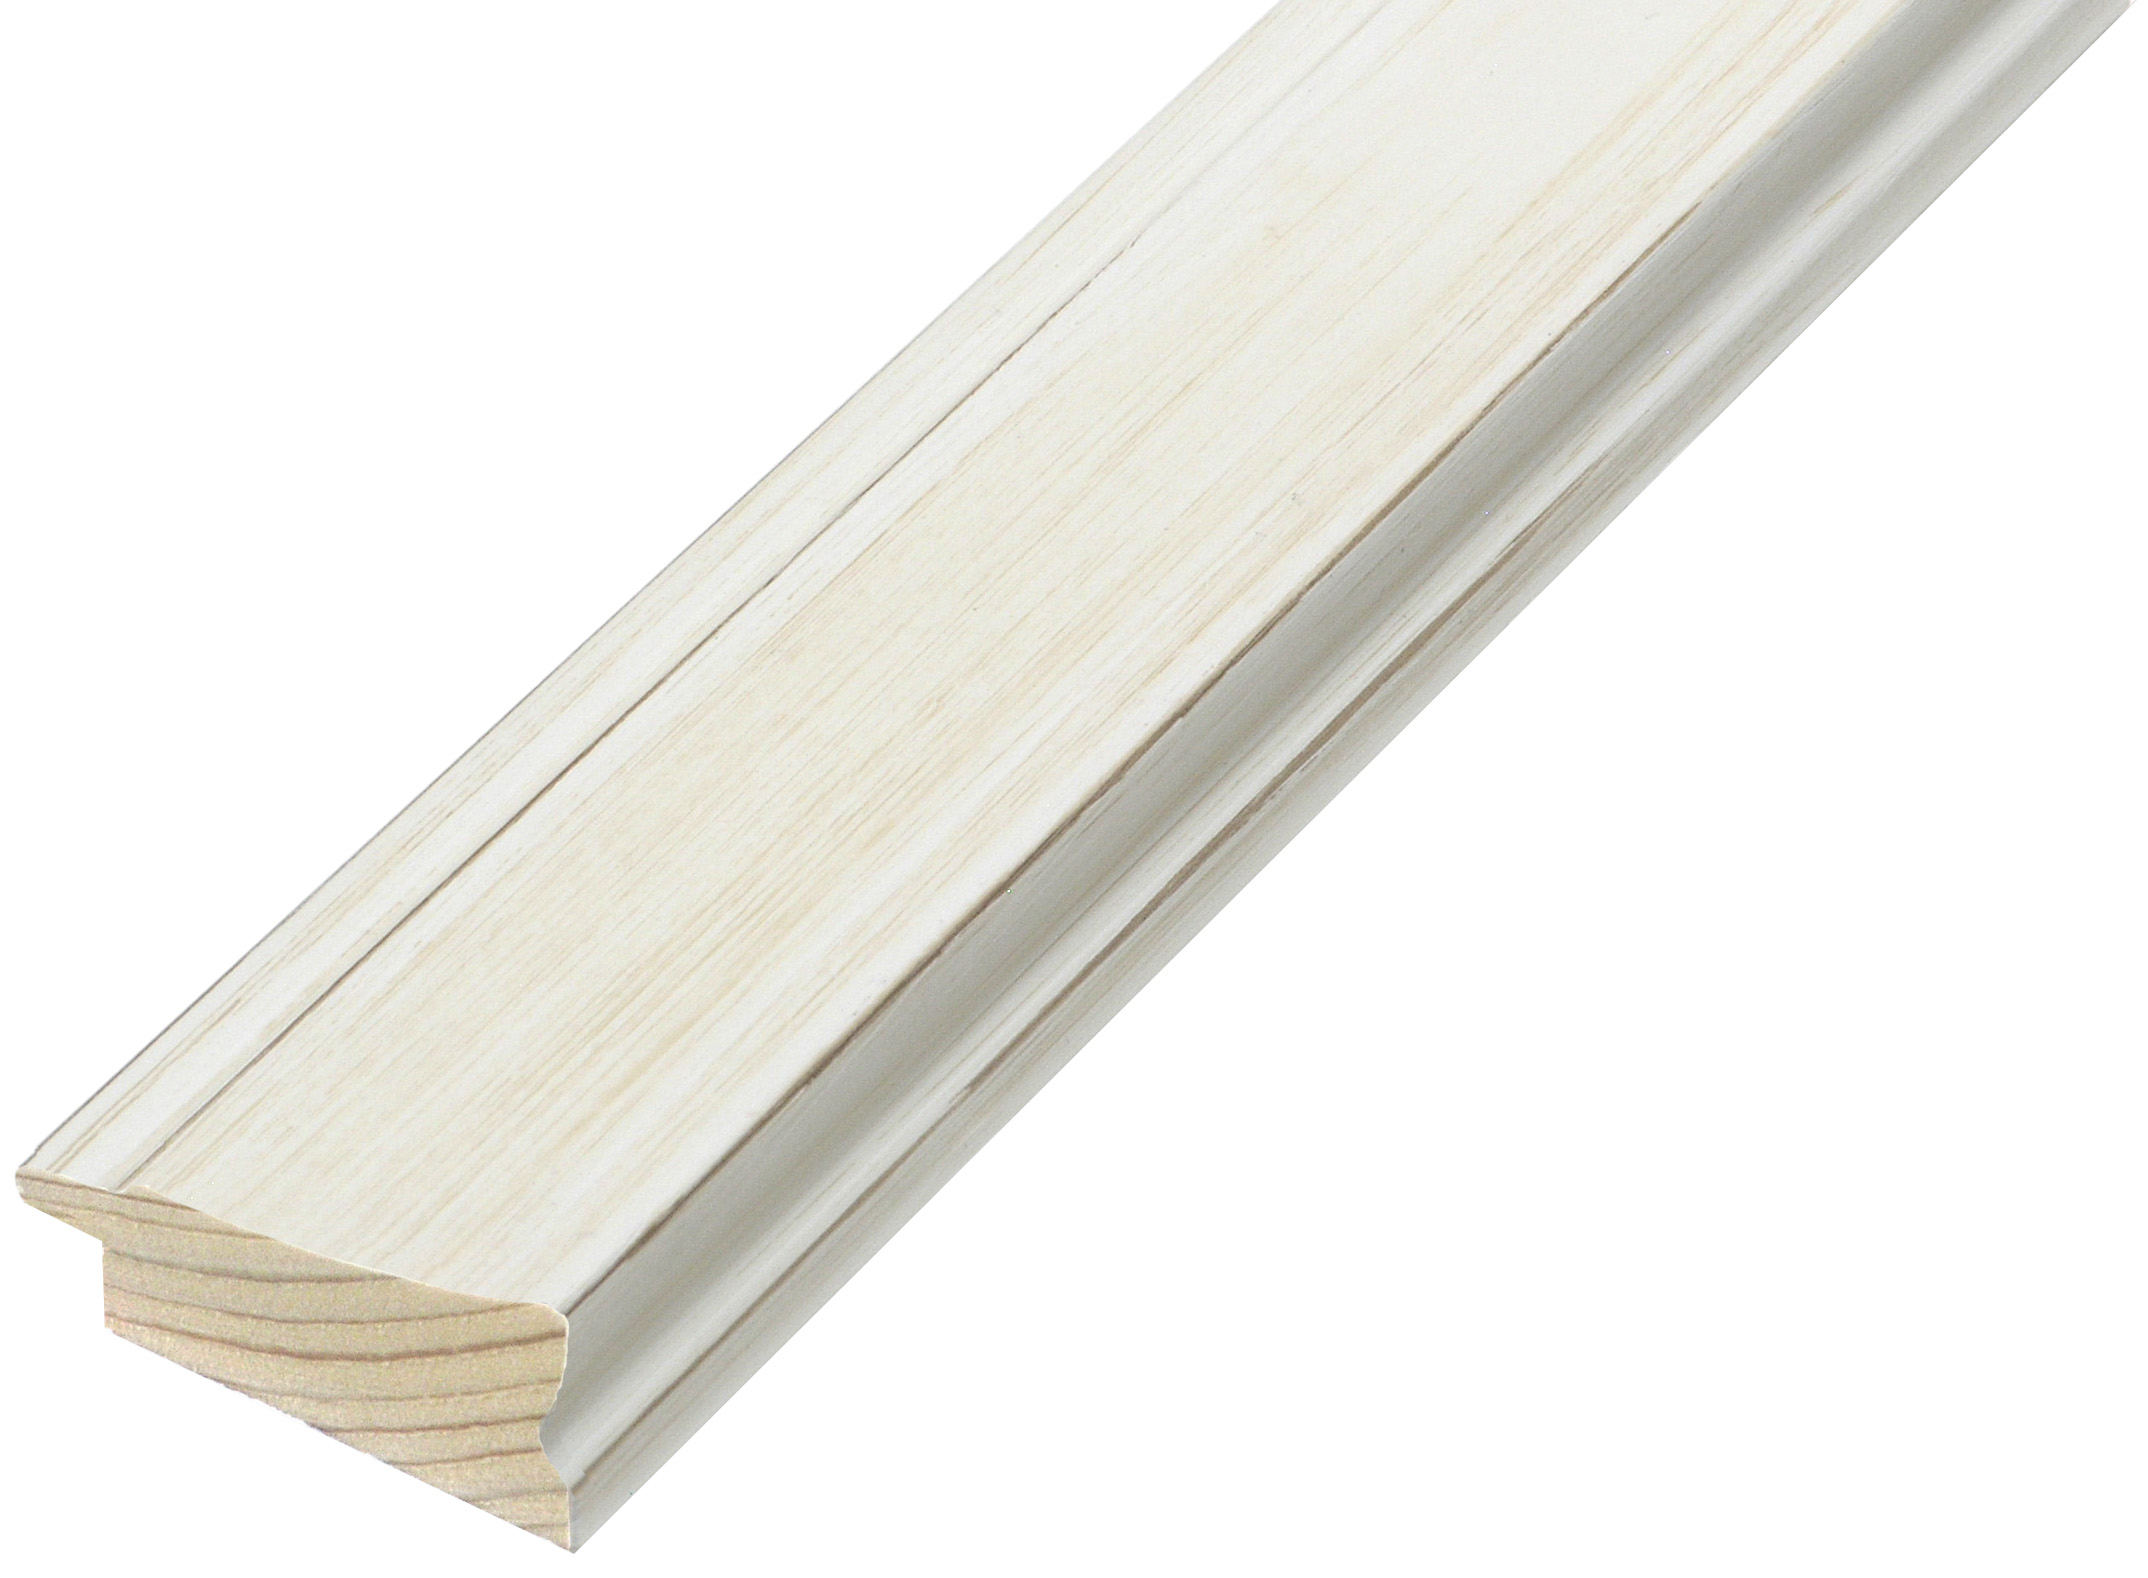 Moulding finger-jointed pine - Width 43mm - Cream finish - 423CREMA